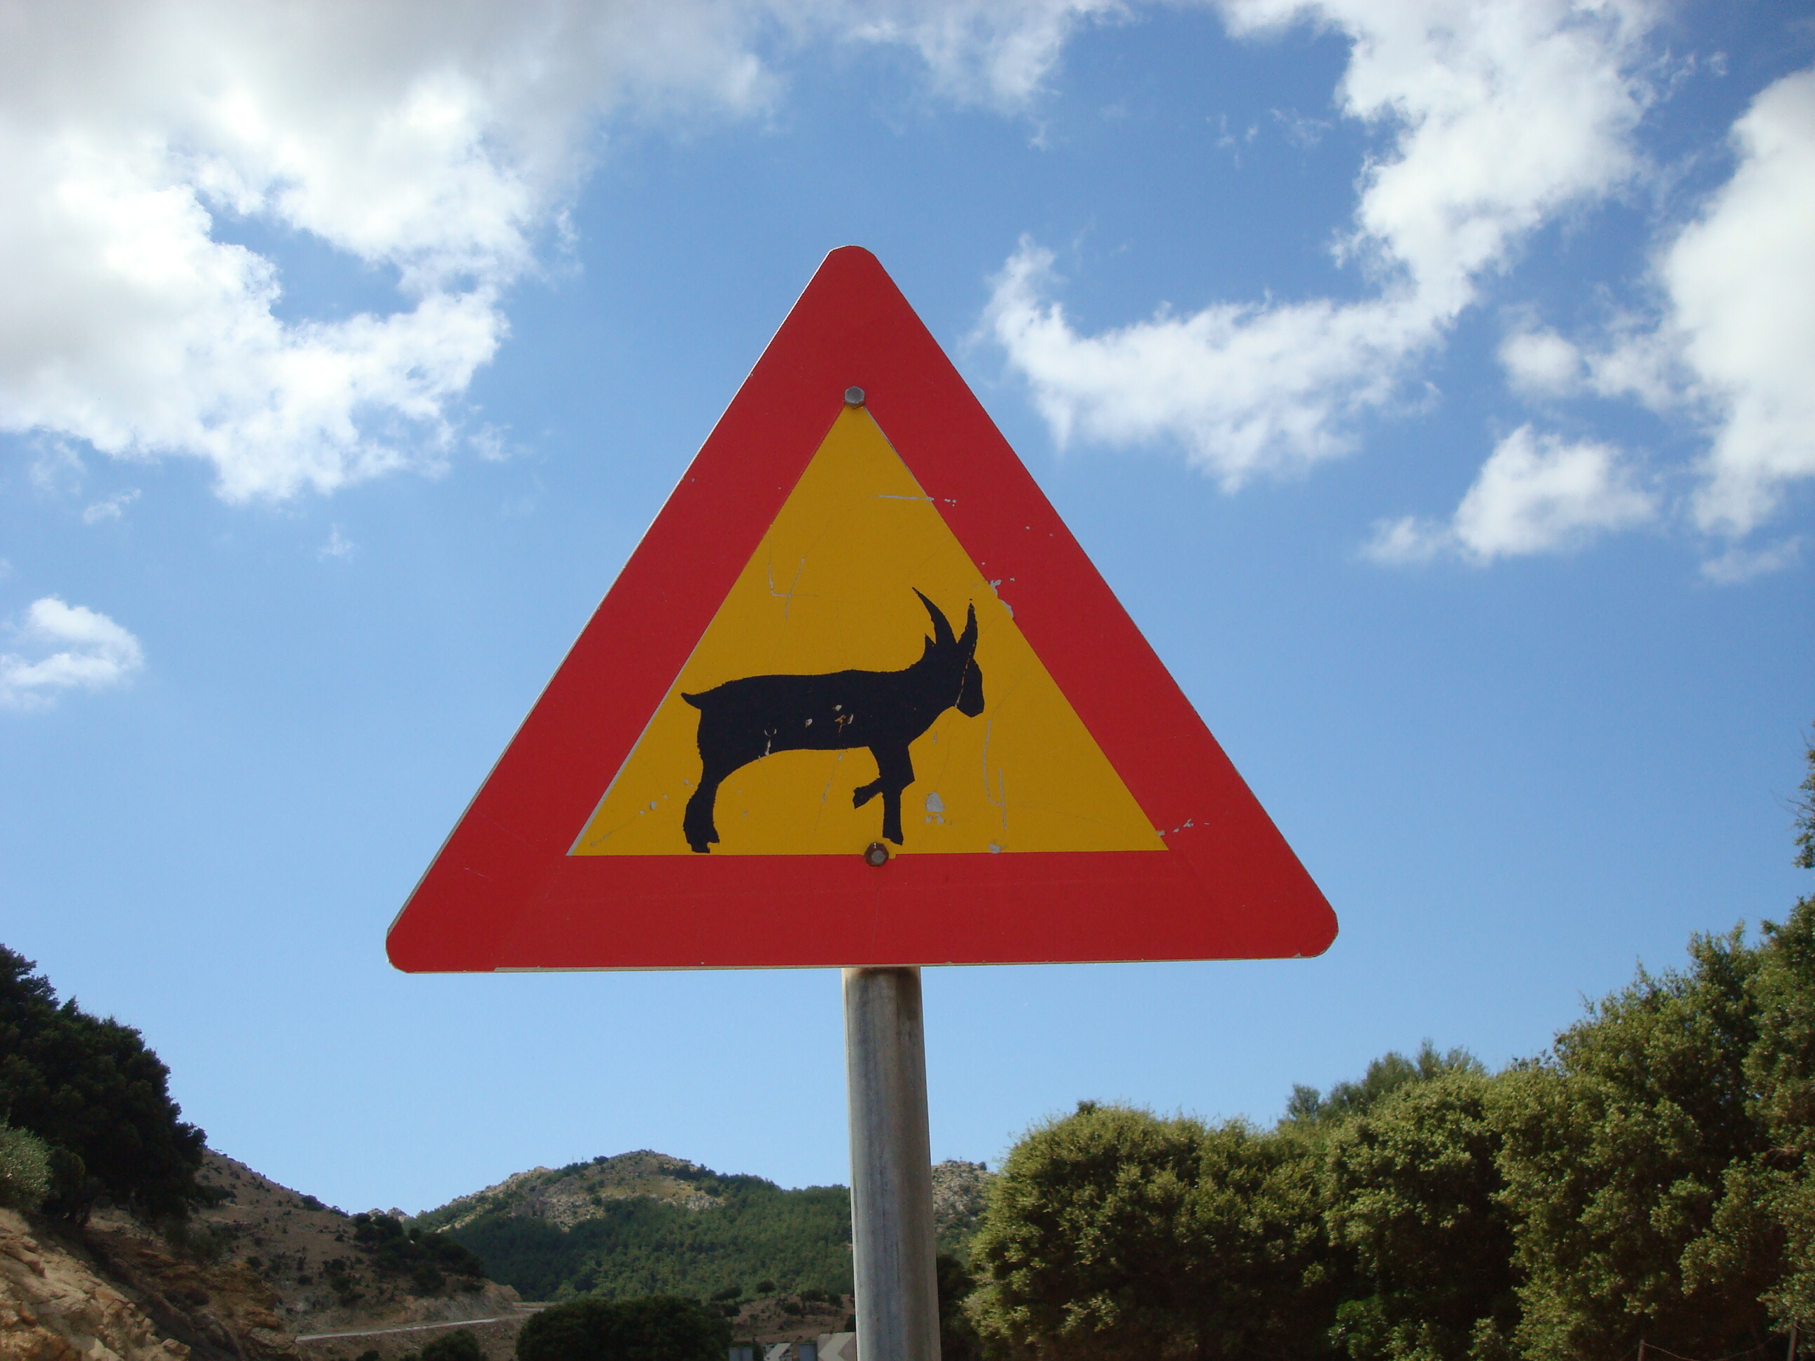 One of the many goat crossing signs that line the roads on Samothrace.